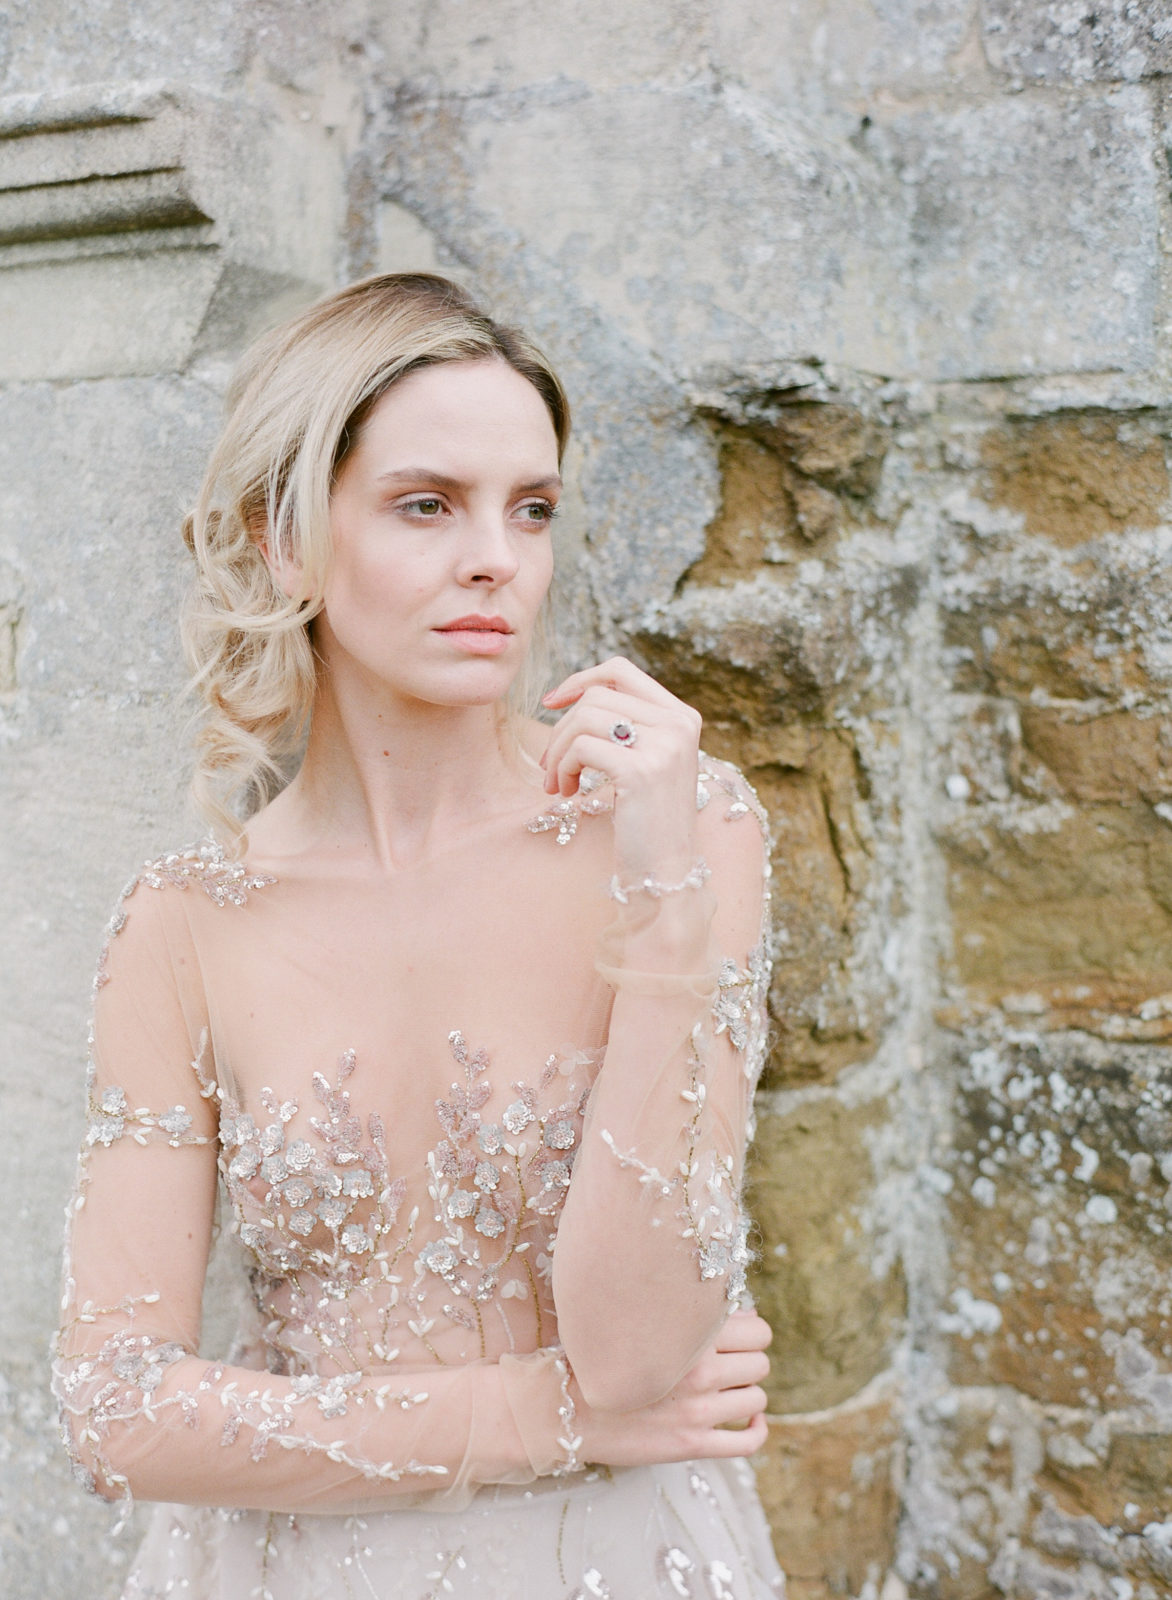 Romantic Bridal Hairstyles Photographed by Molly Carr Photography | Fine Art Bridal Hair and Makeup | Paris Wedding Photographer | Paris Film Photographer | France Destination Wedding | Cotswolds, England Wedding with Lily & Sage